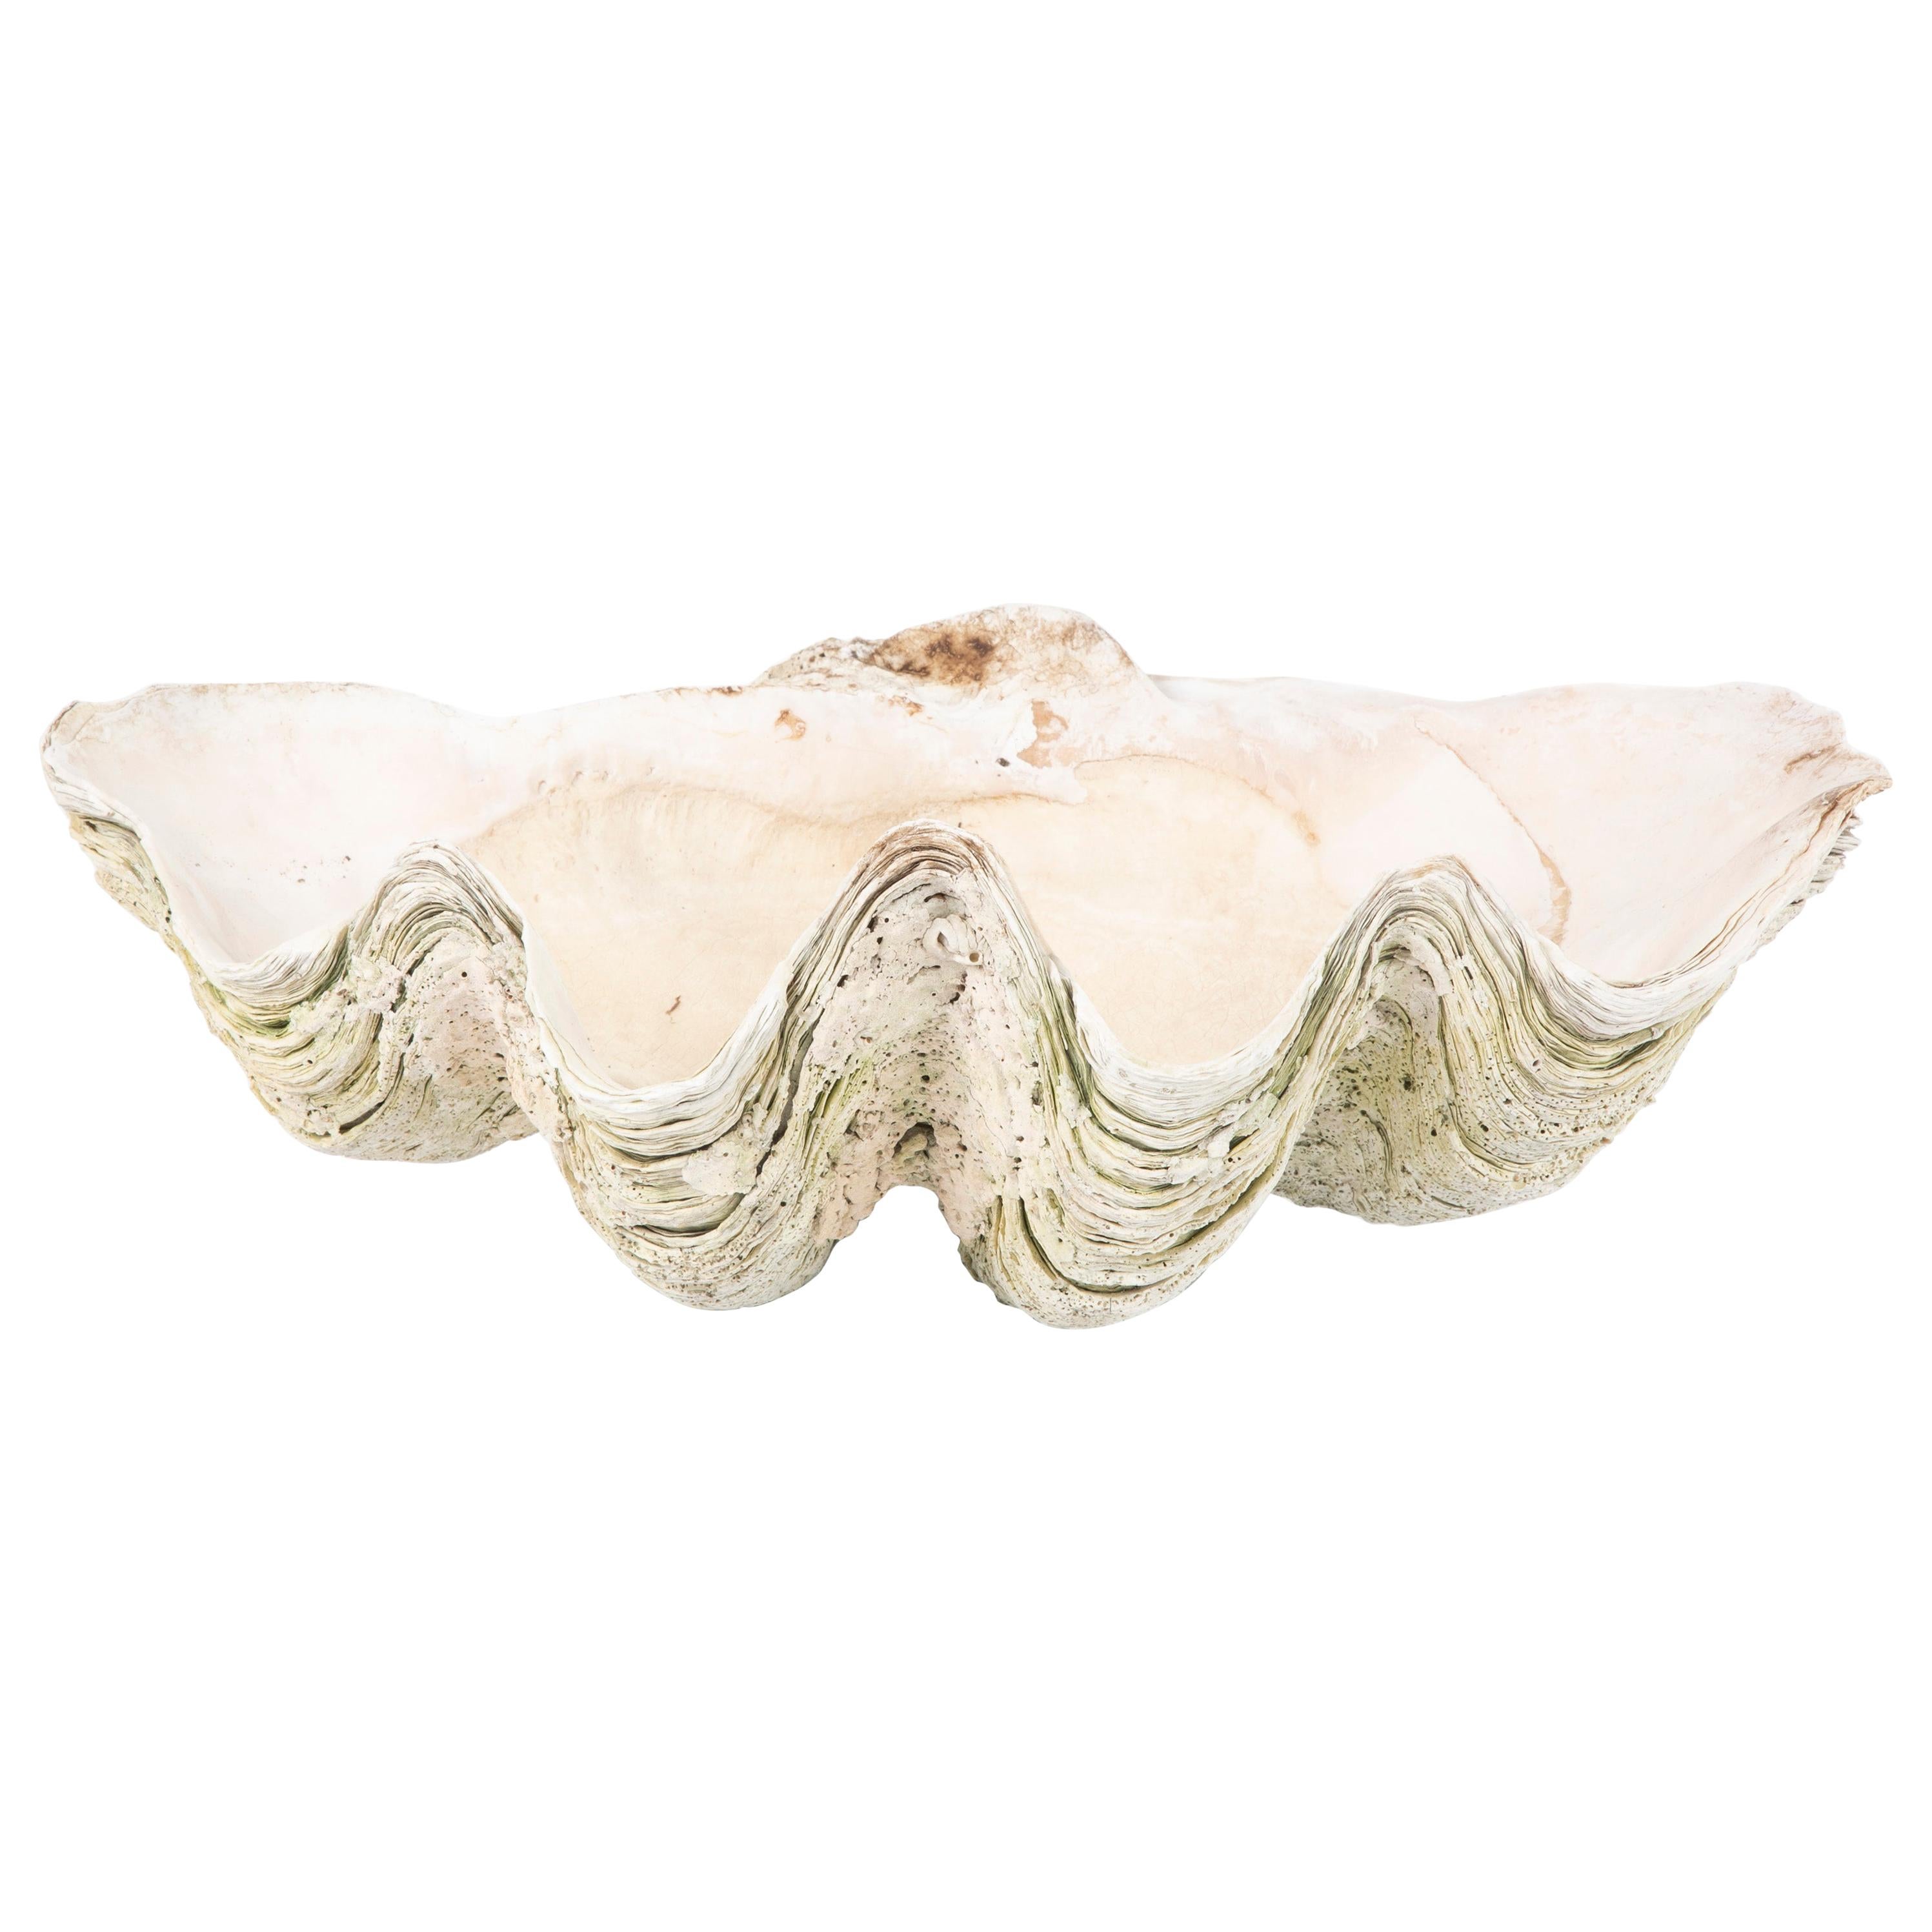 Giant Scalloped Clam Shell Centerpiece